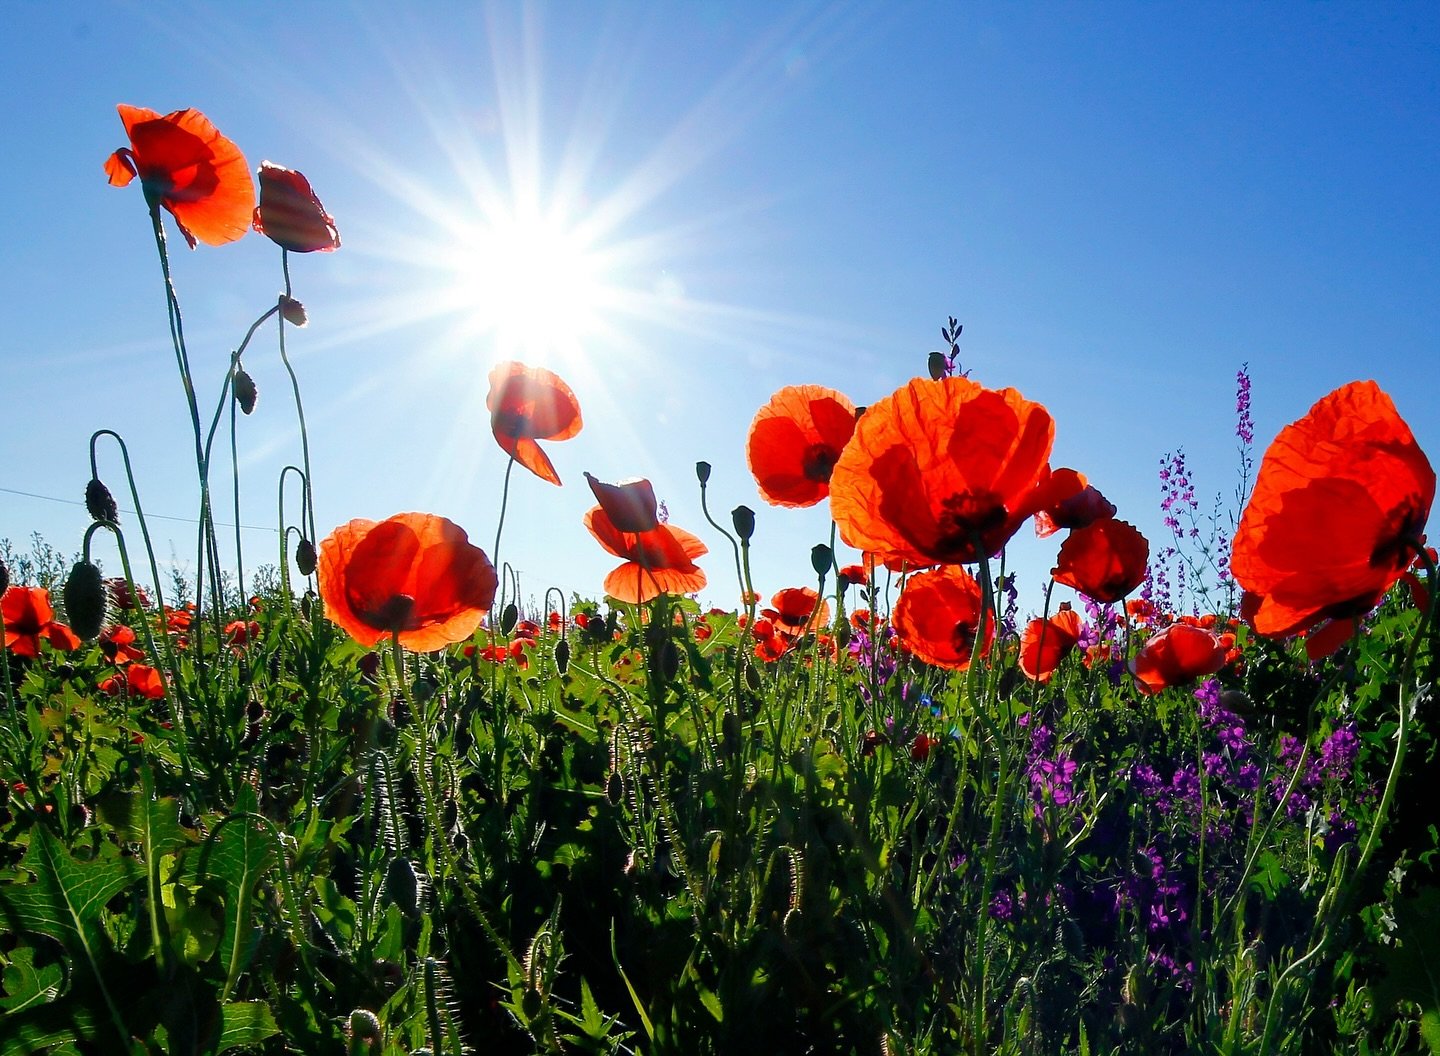 Lest we forget. 
Sending love &amp; light out to all on this Anzac Day. A day to stop, remember and be grateful for the sacrifices made for us. xx
#wewillrememberthem #anzacday #lestweforget